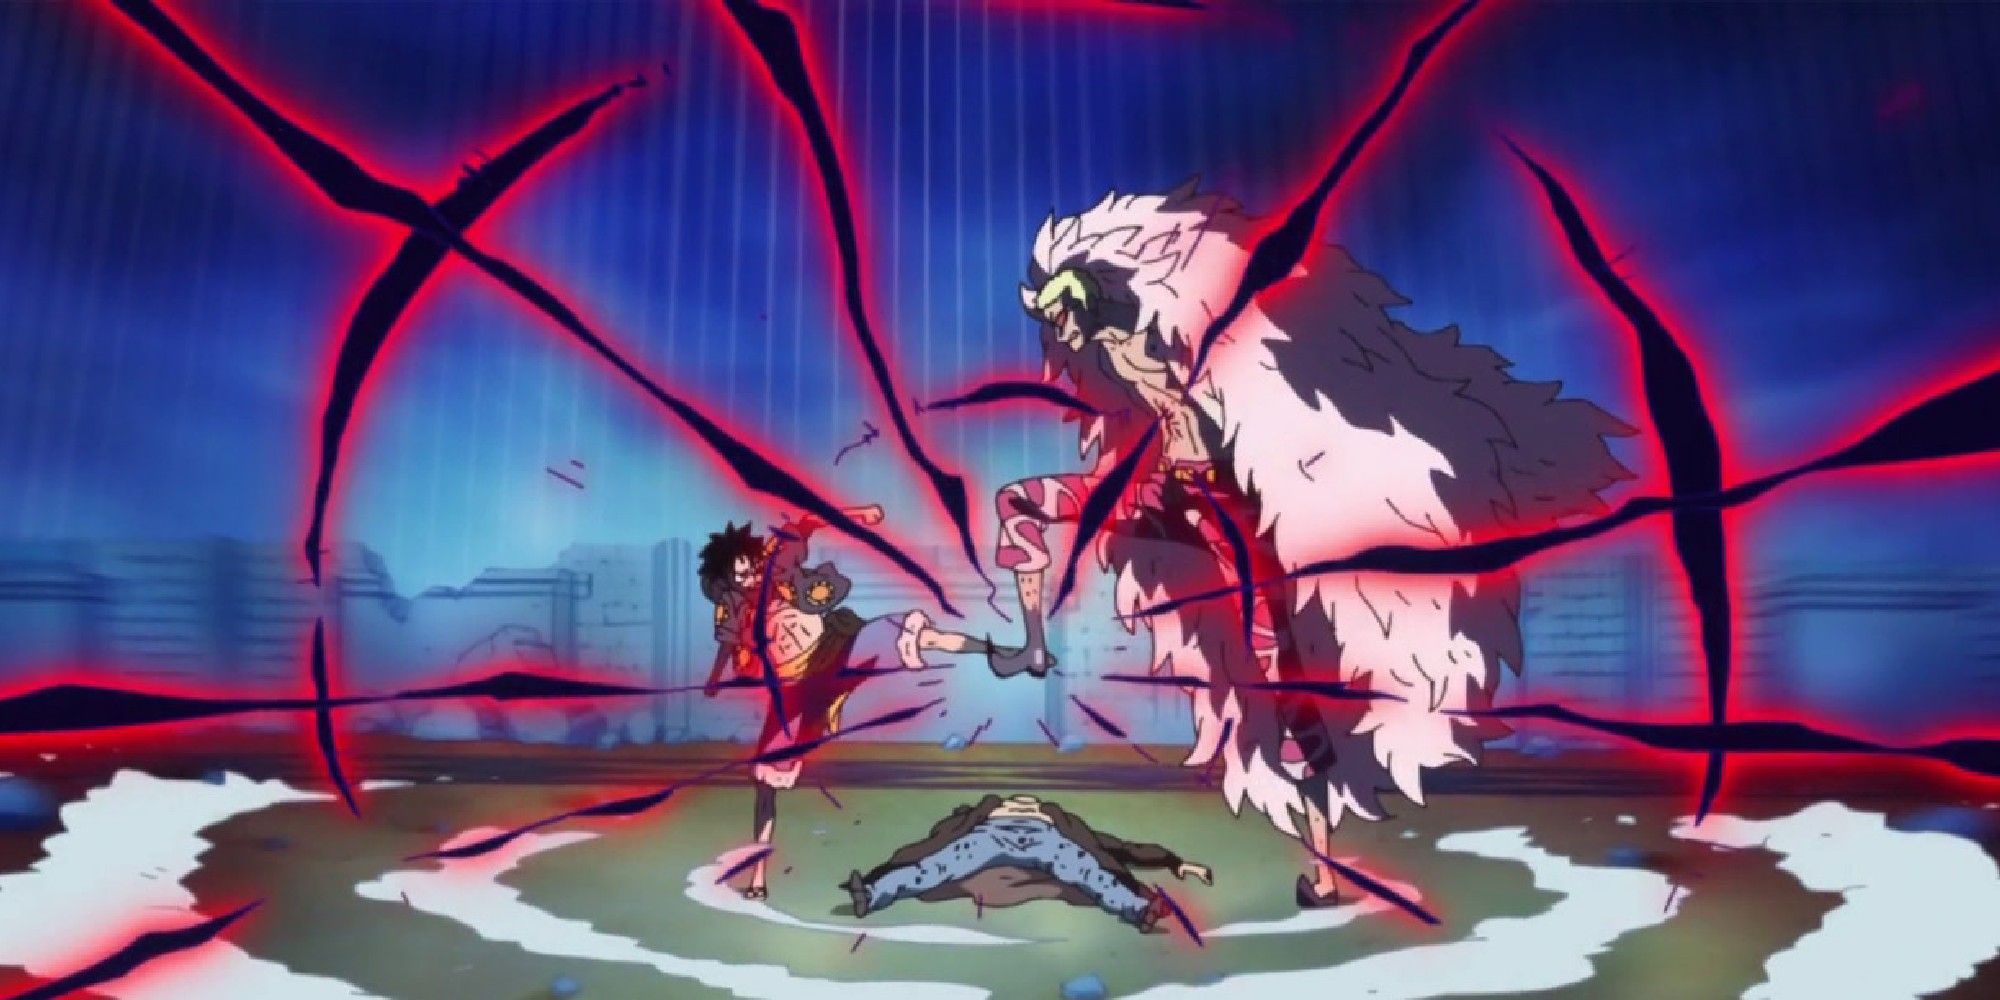 Luffy vs. Doflamingo from the Dressrosa Arc of One Piece